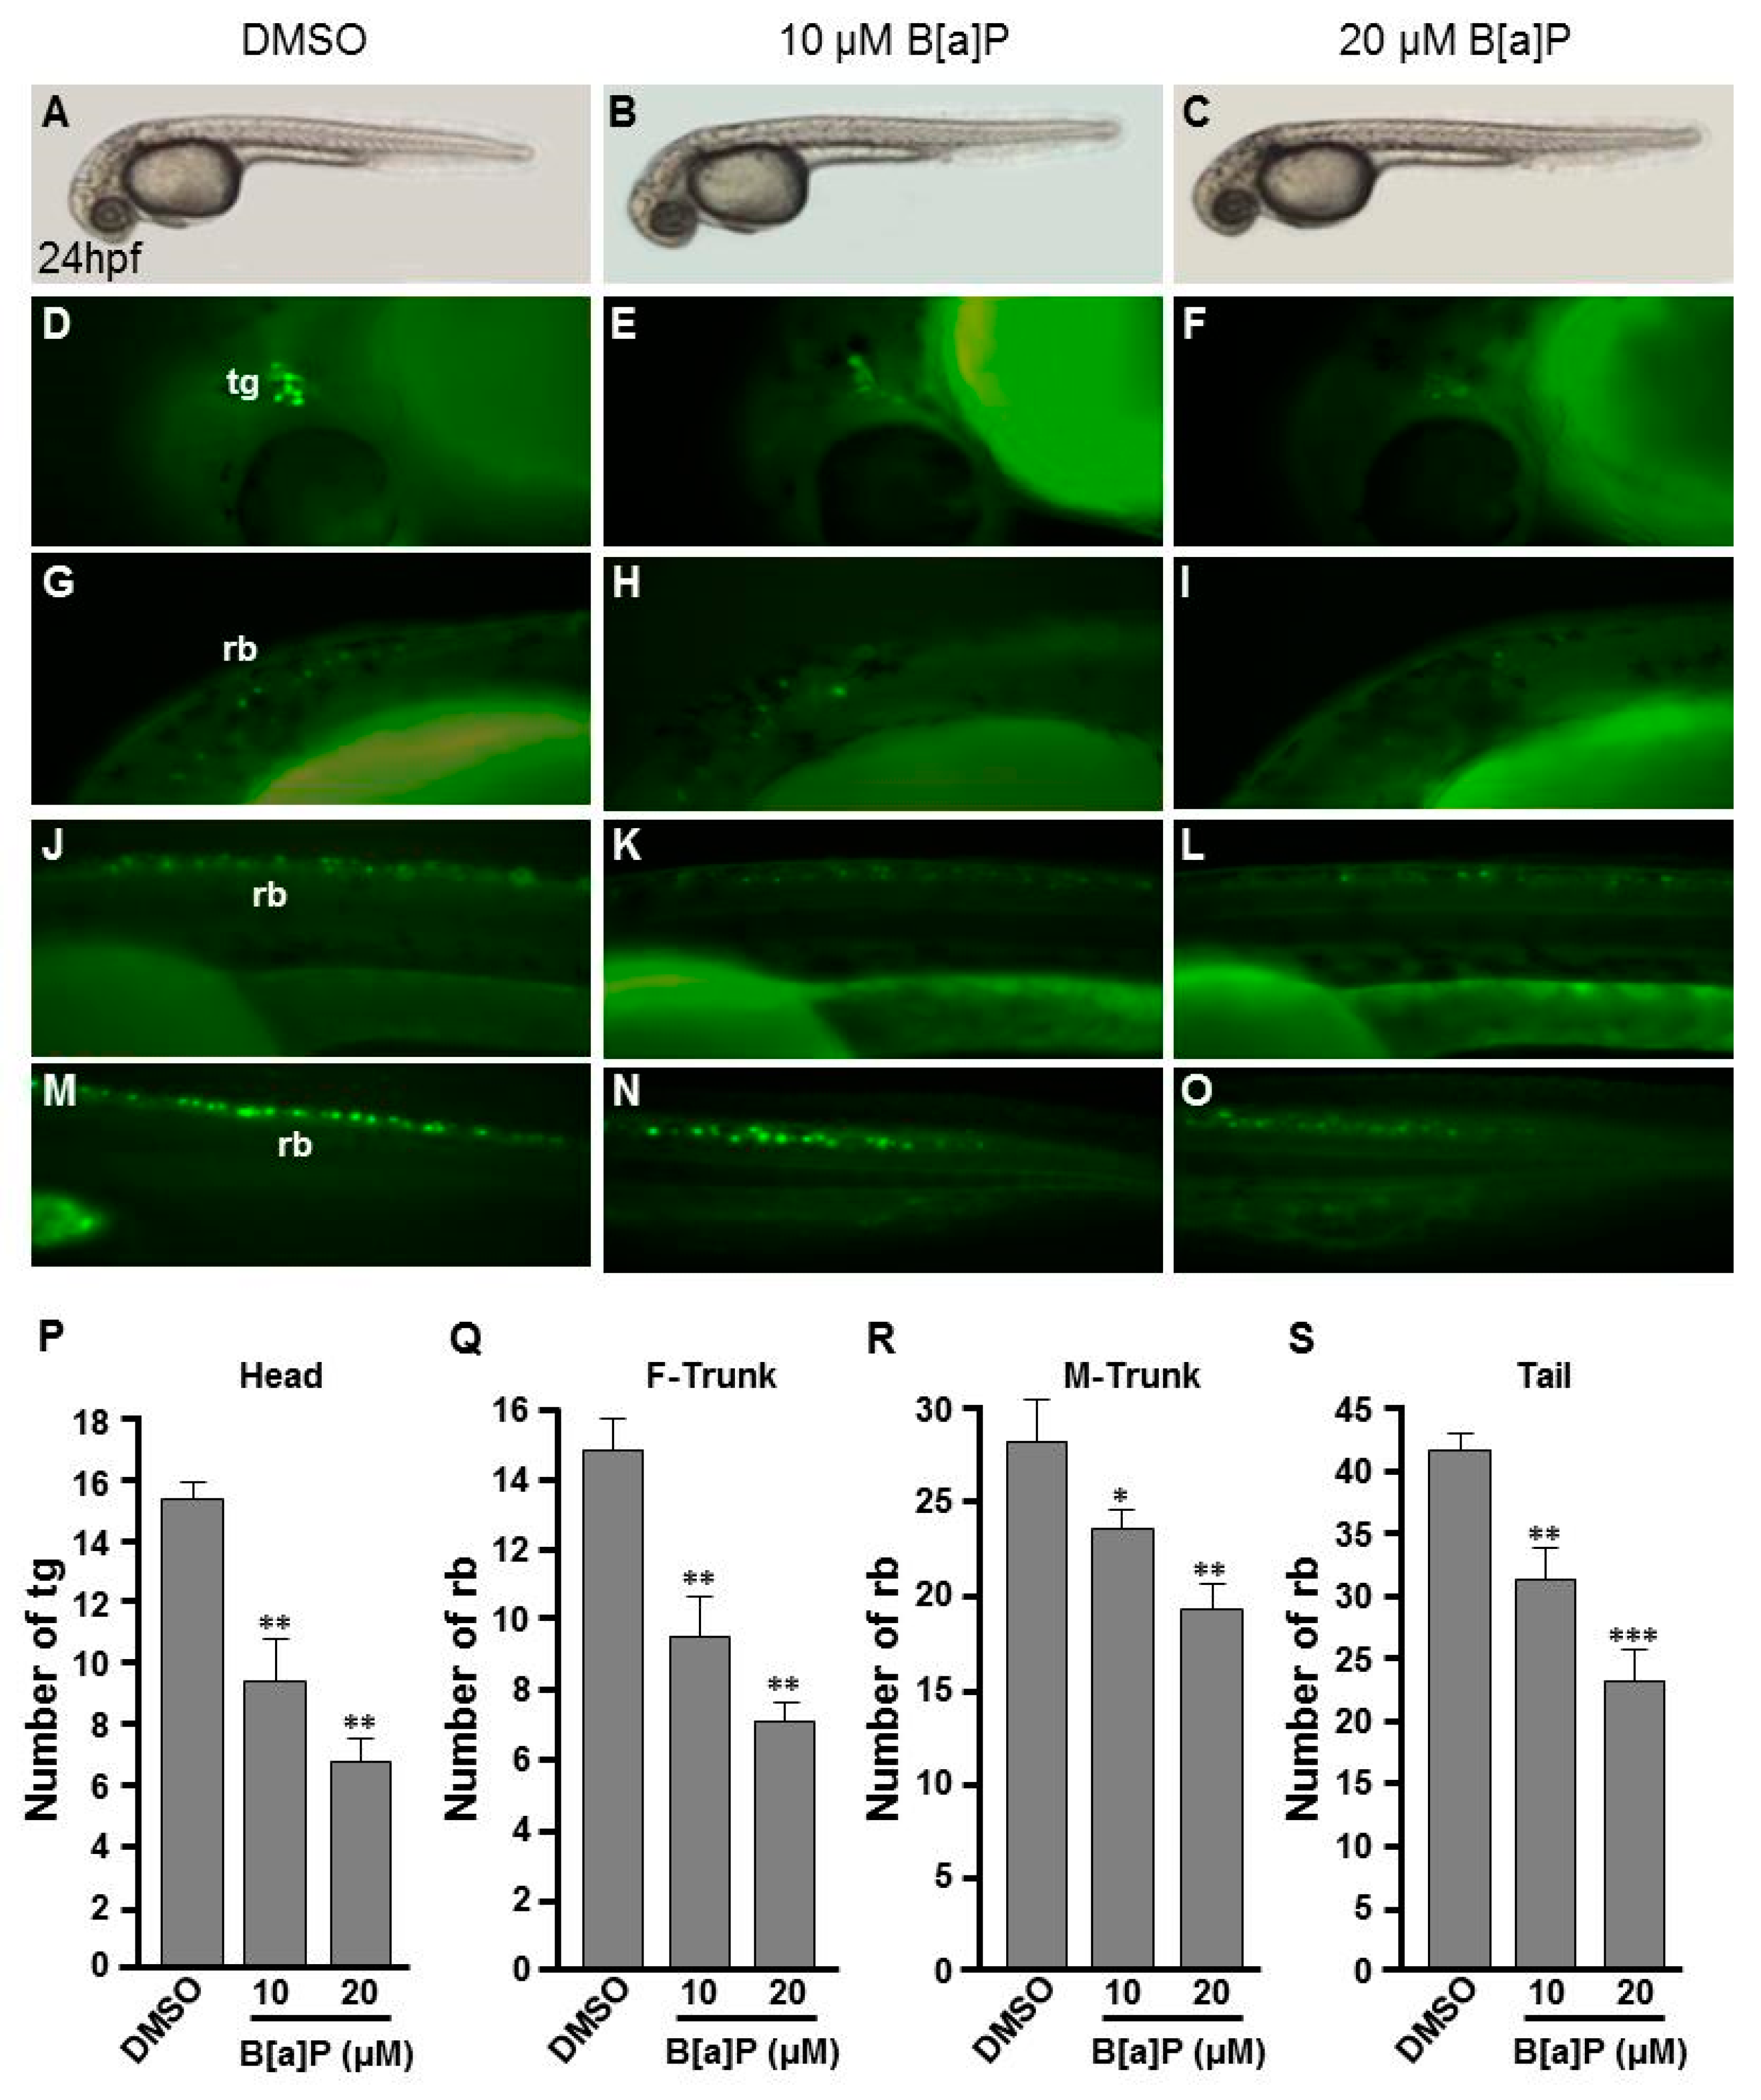 Antioxidants Free Full Text Integrated Hypoxia Signaling And Oxidative Stress In Developmental Neurotoxicity Of Benzo A Pyrene In Zebrafish Embryos Html